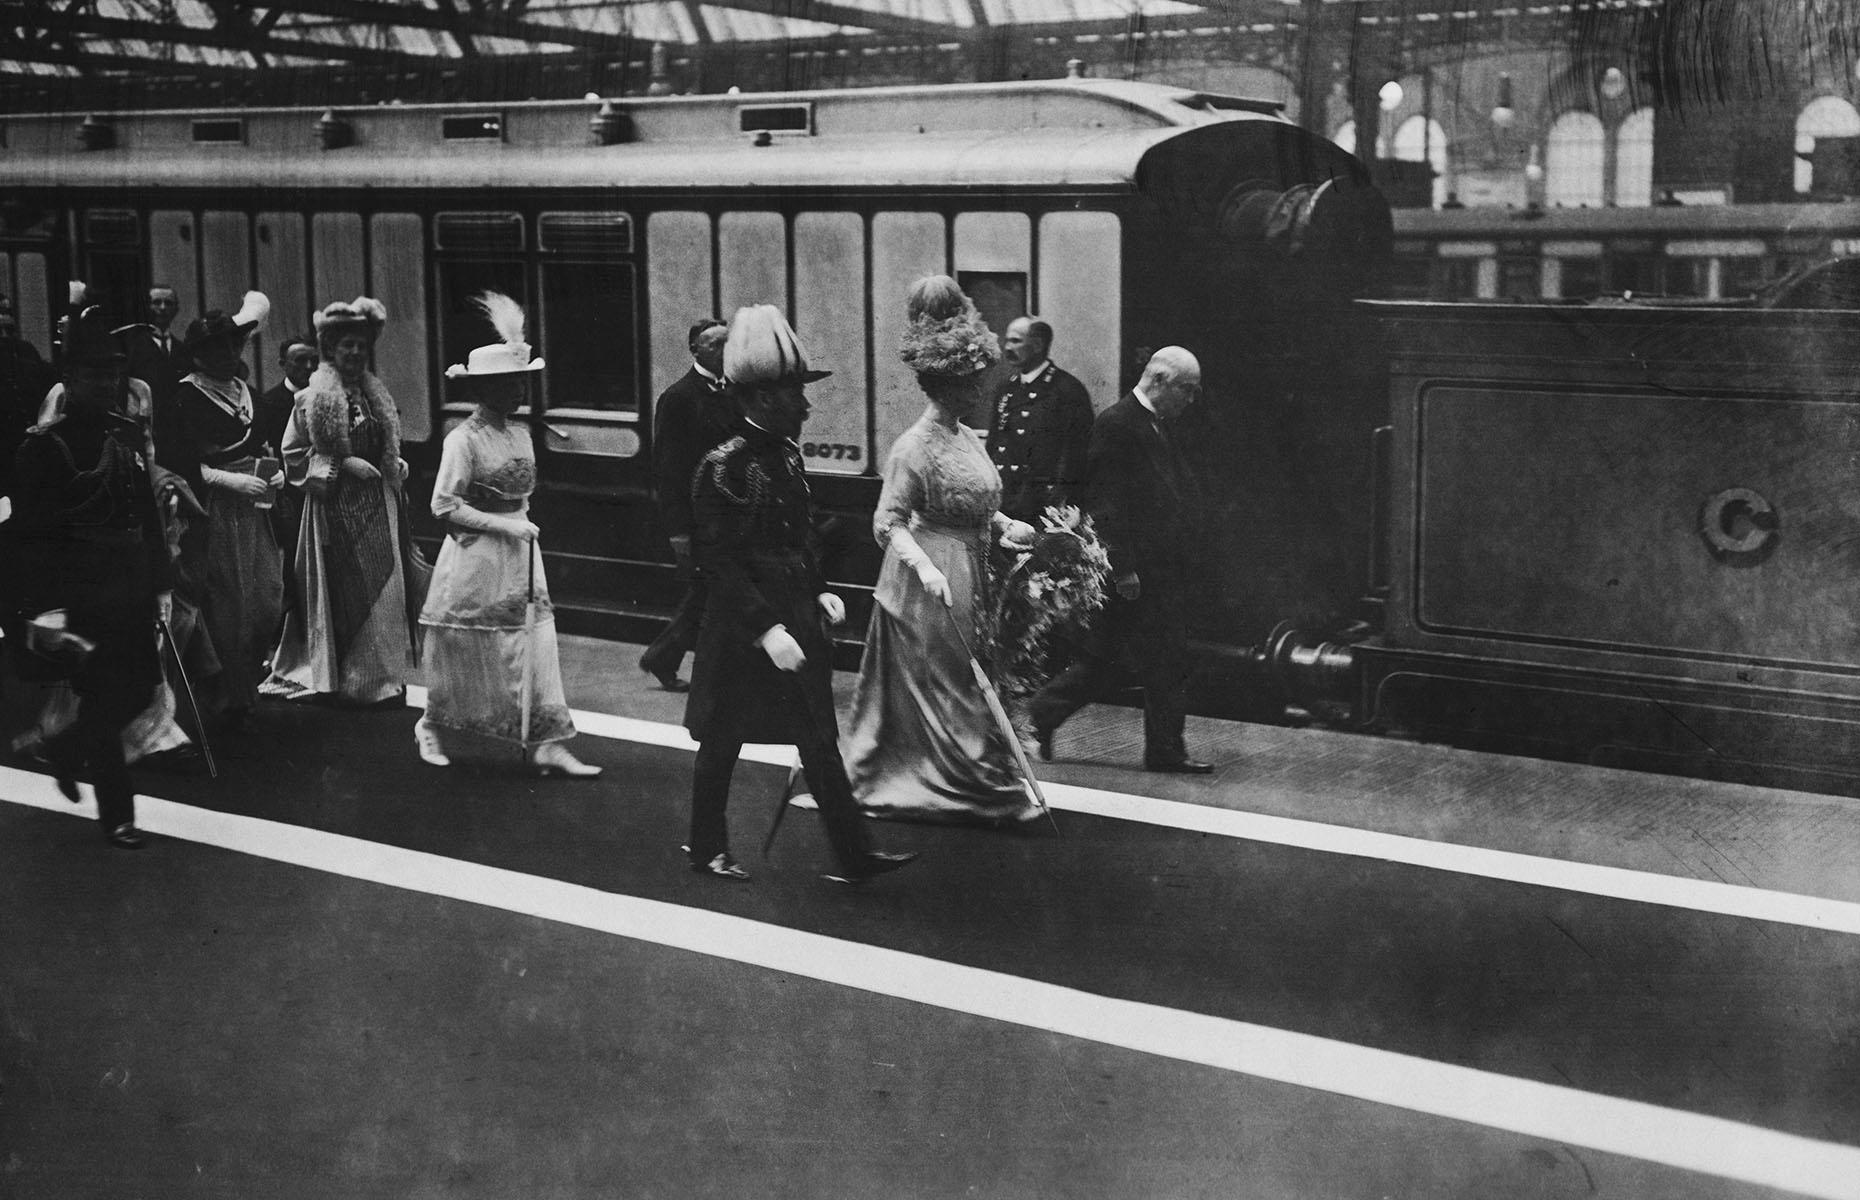 For many years trains were and in some occasions still are the top choice for travel across the UK for the British royals. Here, King George V and the royal party are captured leaving Glasgow Station during a royal tour of Scotland in 1914.